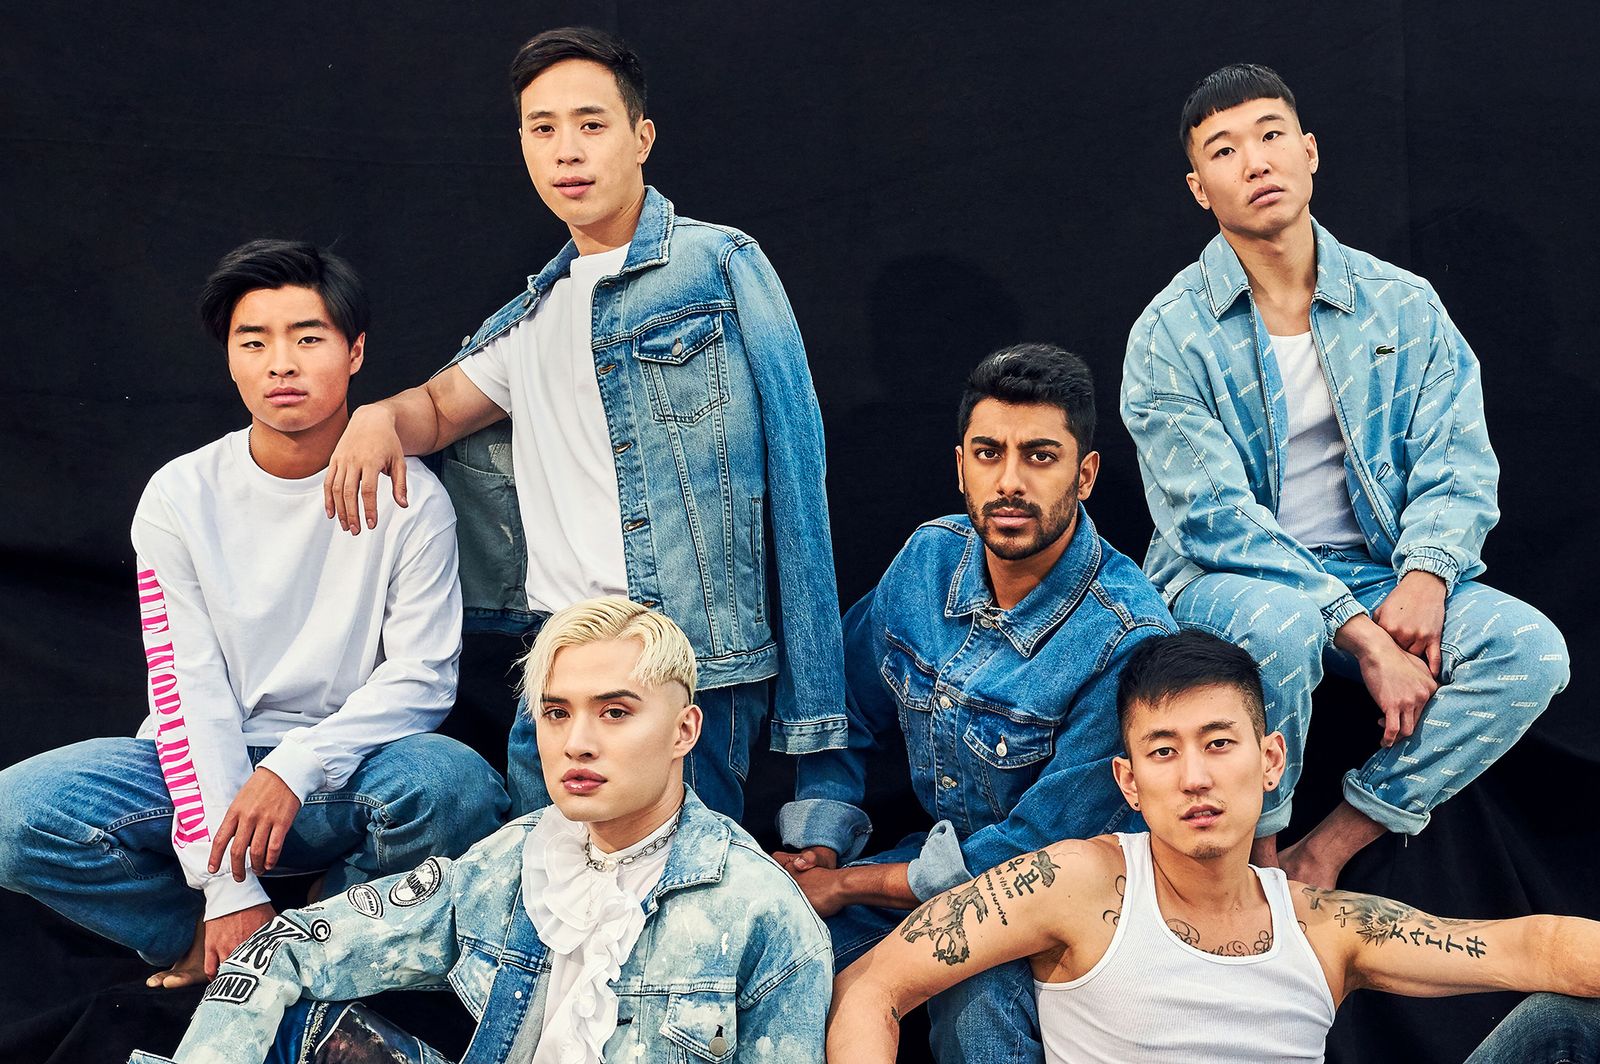 These leading Hollywood stars are changing the face of Asian America